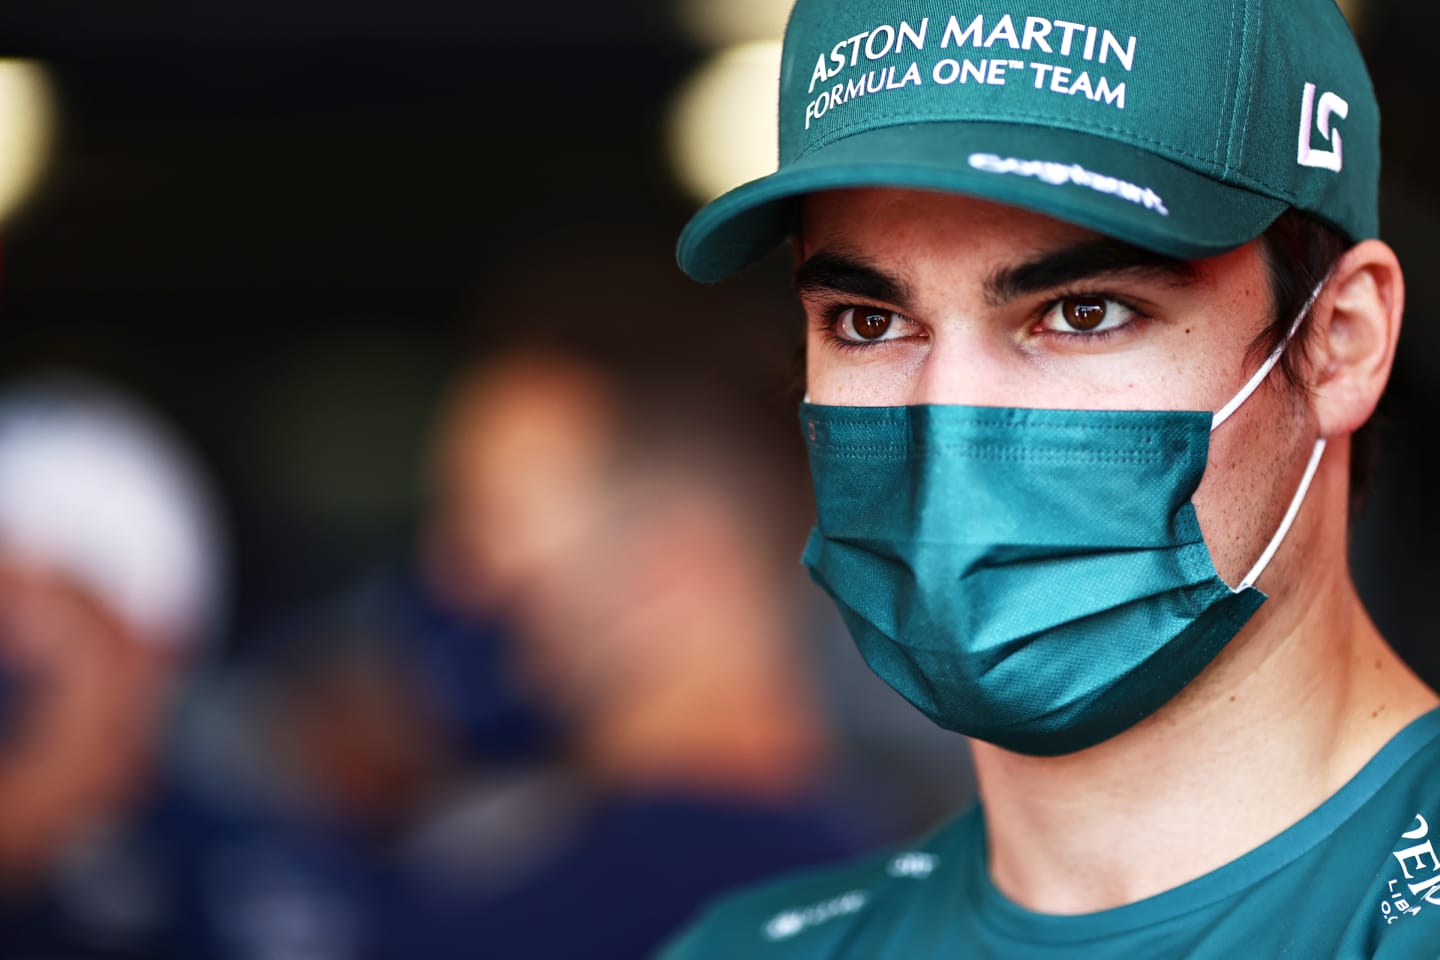 SAO PAULO, BRAZIL - NOVEMBER 14: Lance Stroll of Canada and Aston Martin F1 Team looks on before the F1 Grand Prix of Brazil at Autodromo Jose Carlos Pace on November 14, 2021 in Sao Paulo, Brazil. (Photo by Mark Thompson/Getty Images)